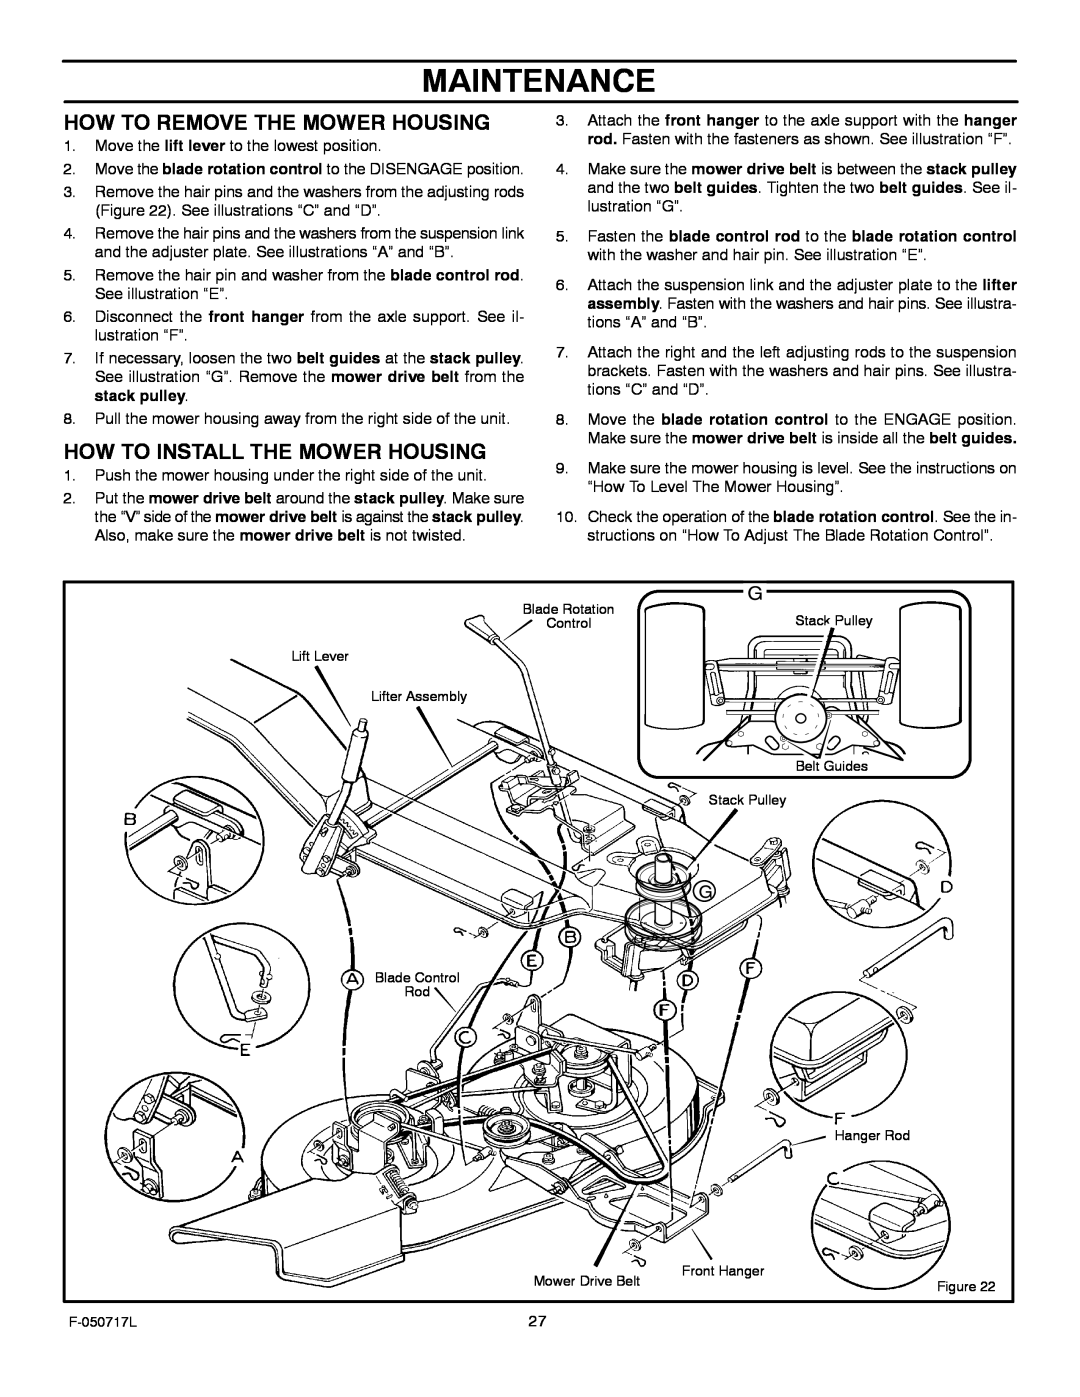 Murray 387002x92D manual Maintenance, How To Remove The Mower Housing, How To Install The Mower Housing 